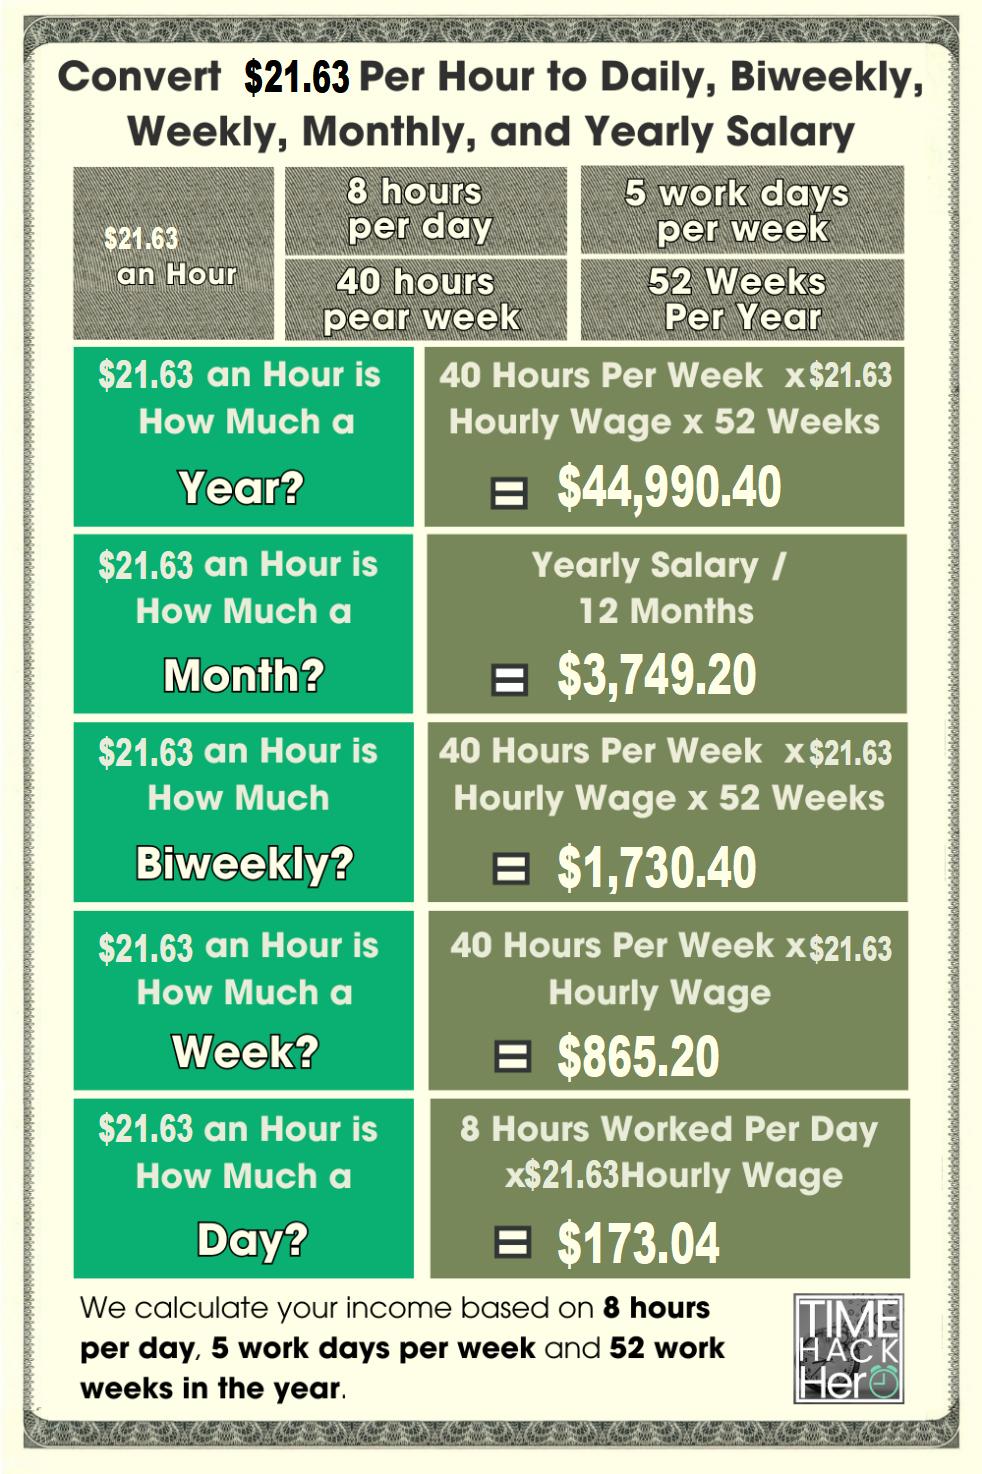 Convert $21.63 Per Hour to Weekly, Monthly, and Yearly Salary